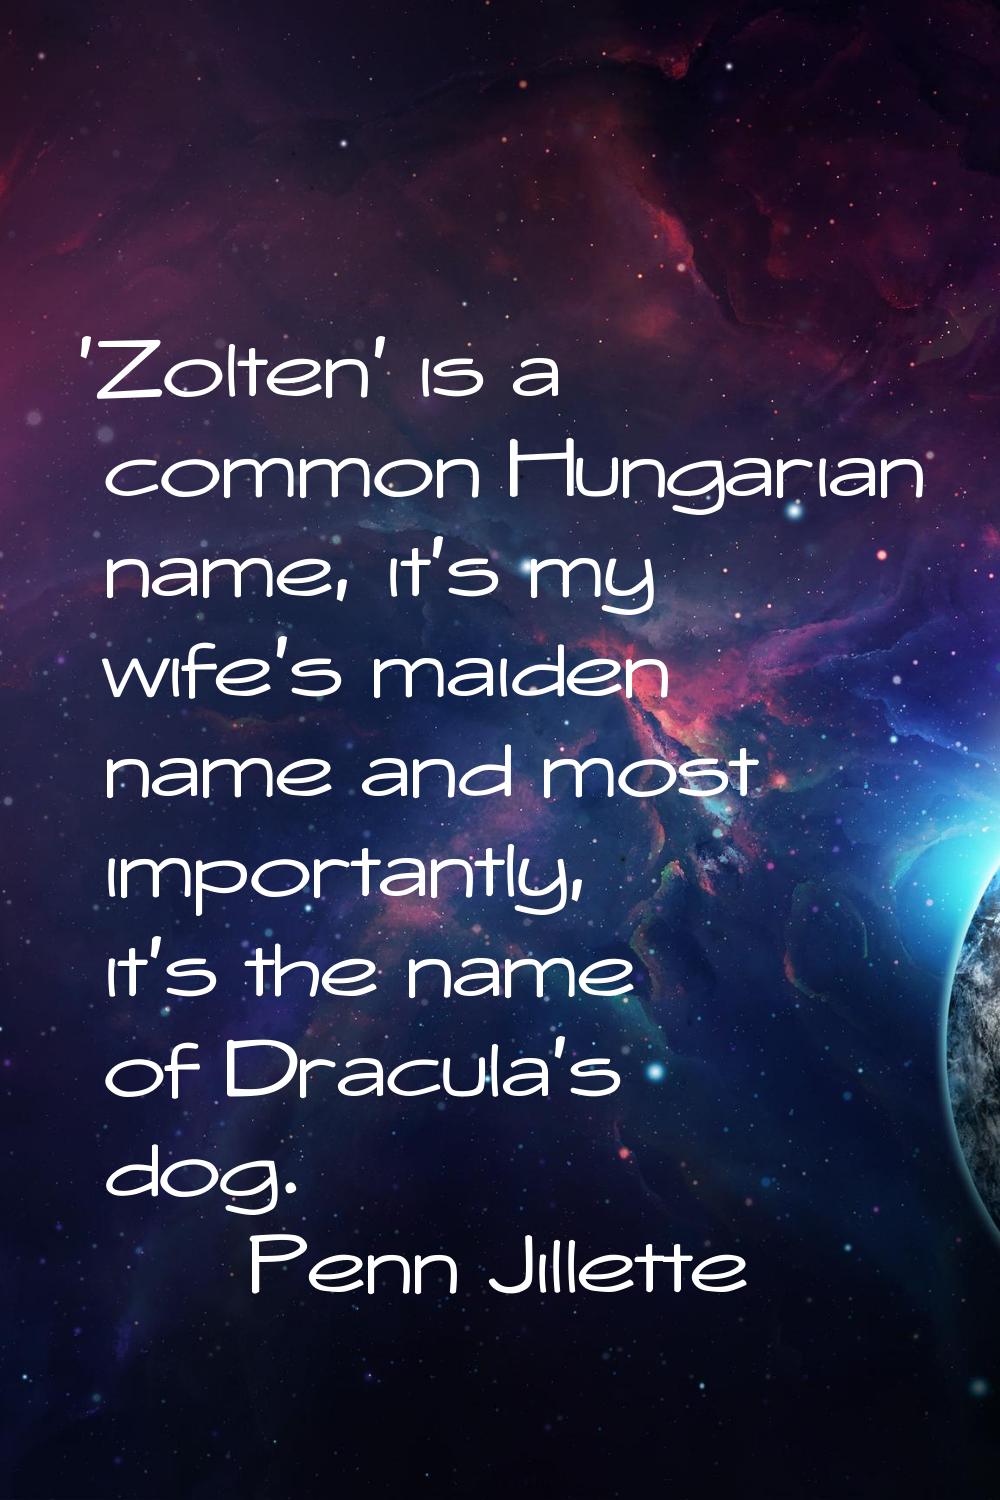 'Zolten' is a common Hungarian name, it's my wife's maiden name and most importantly, it's the name